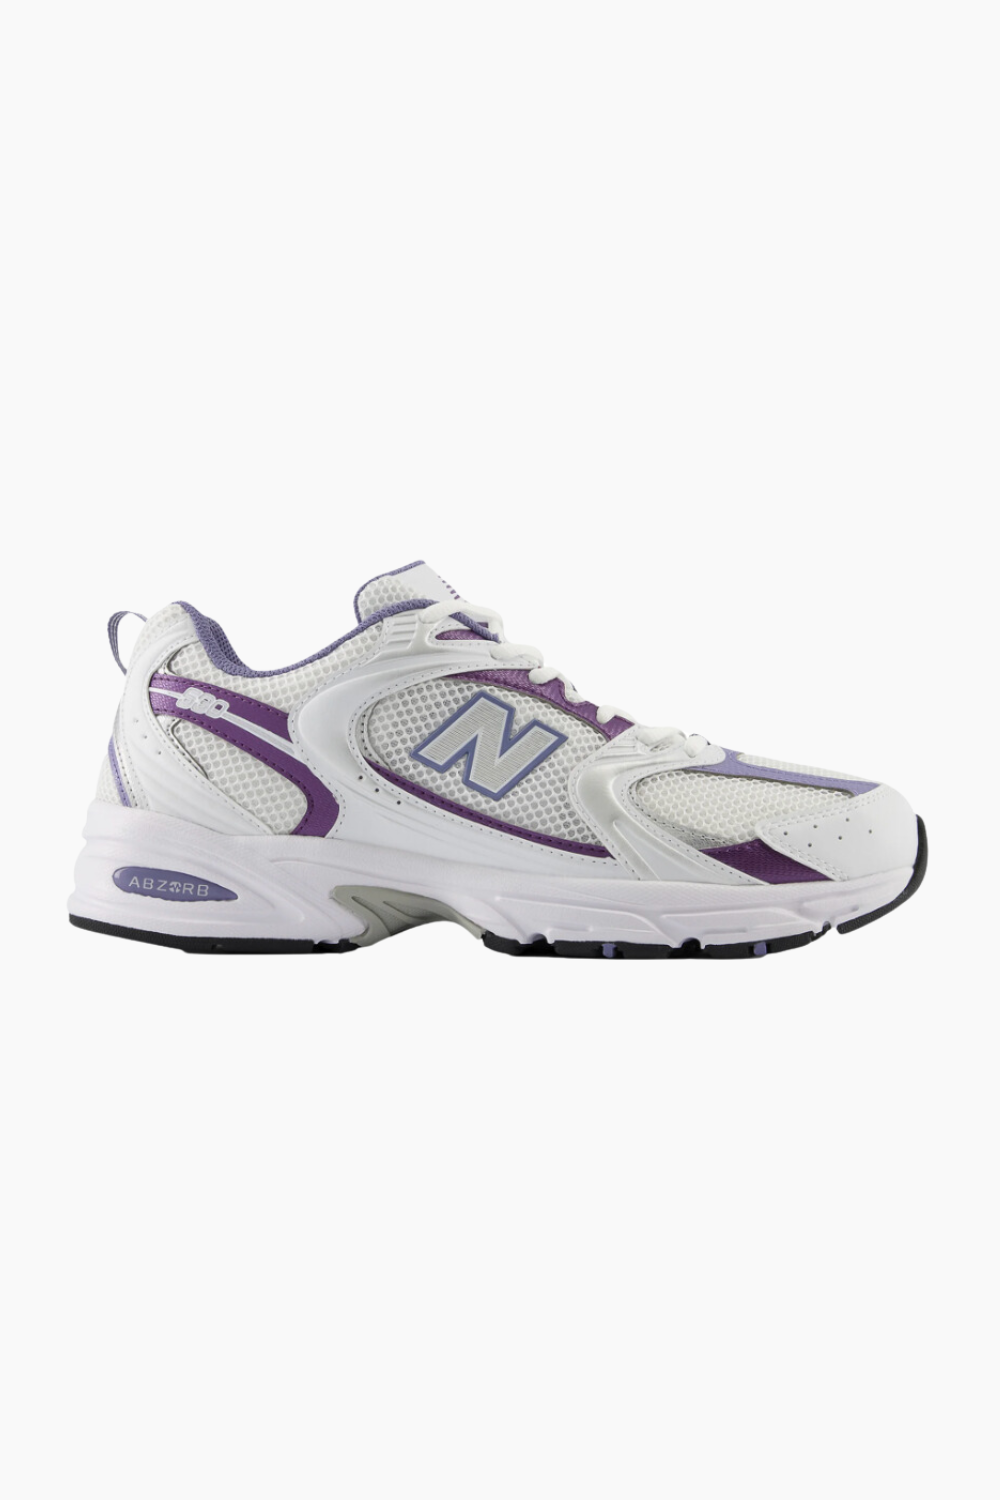 MR530RE - White/Dusted Grape - New Balance